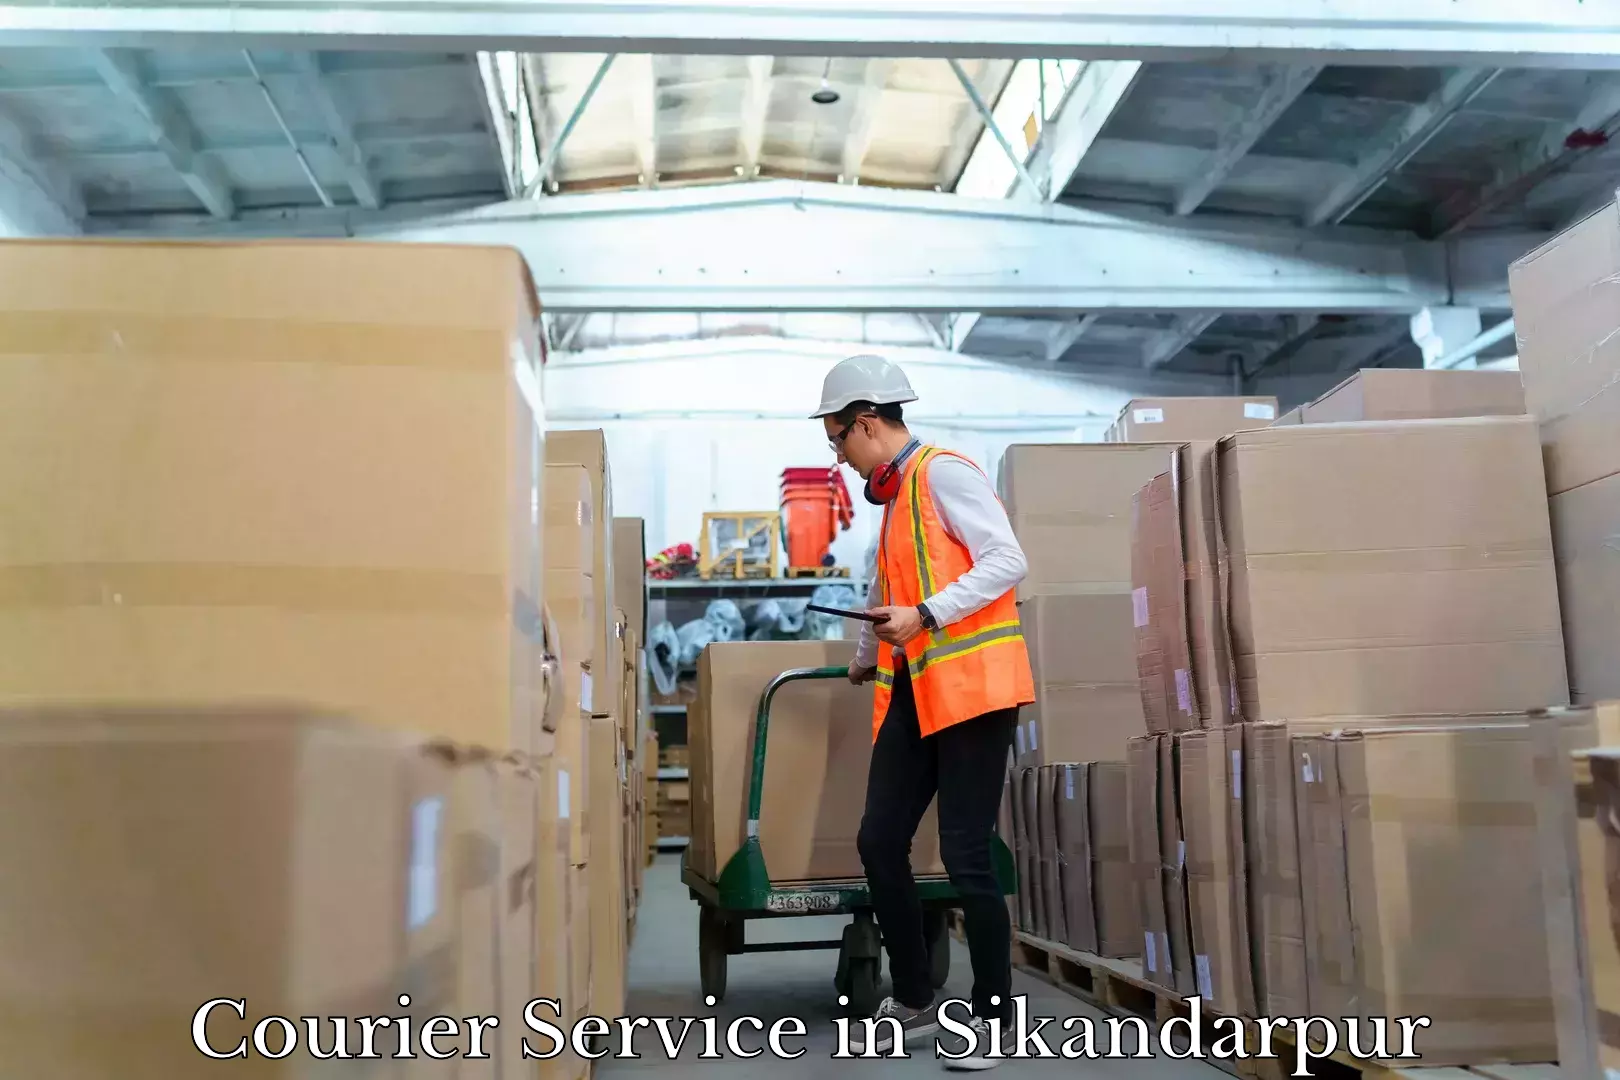 24-hour courier services in Sikandarpur